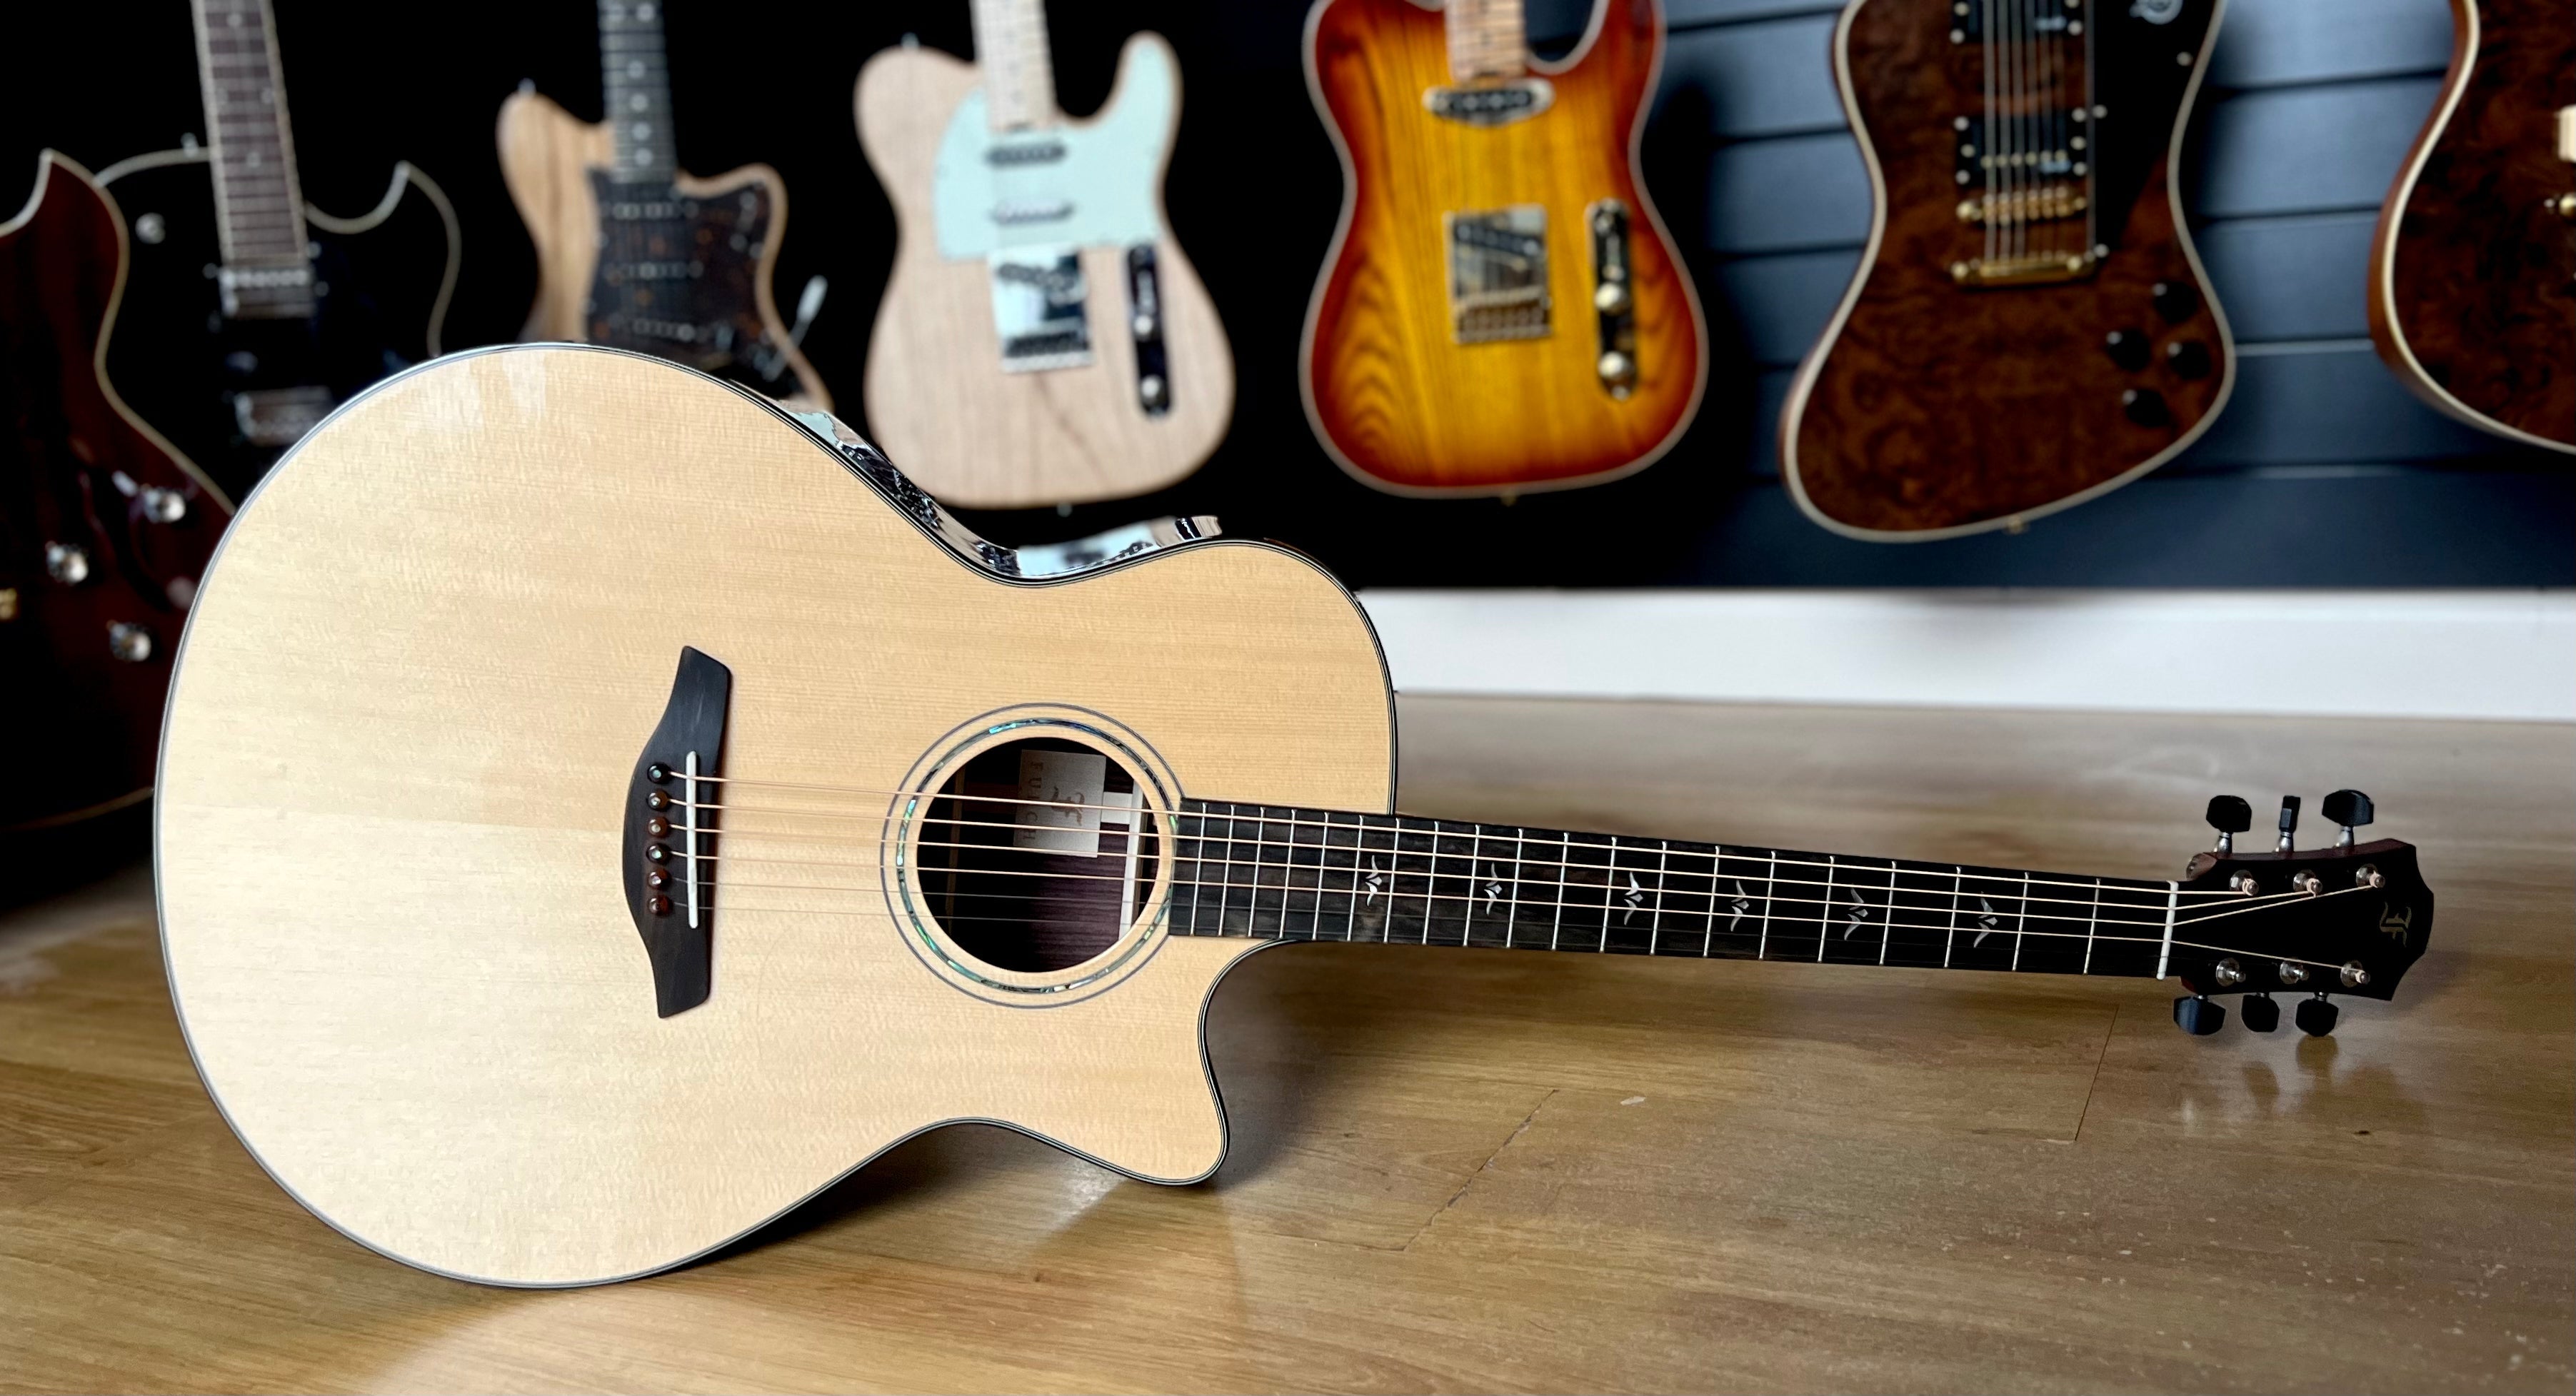 Furch Yellow Gc-SR Grand Auditorium (cutaway) Acoustic Guitar (With Option Of Original G23CR  Inlays - A Worldwde No Cost Exclusive), Acoustic Guitar for sale at Richards Guitars.